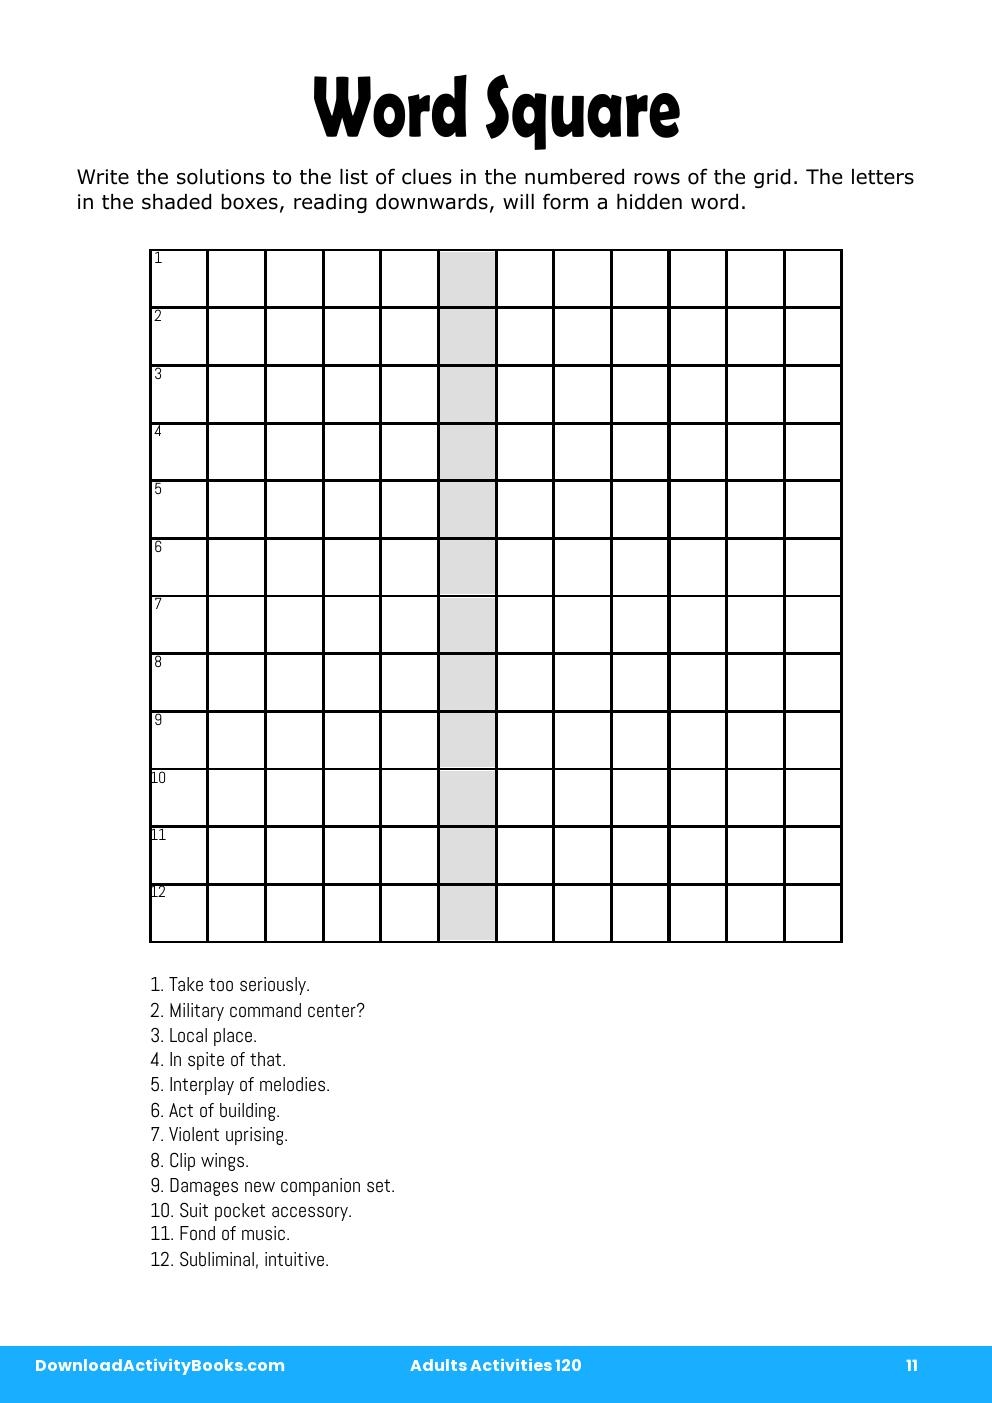 Word Square in Adults Activities 120